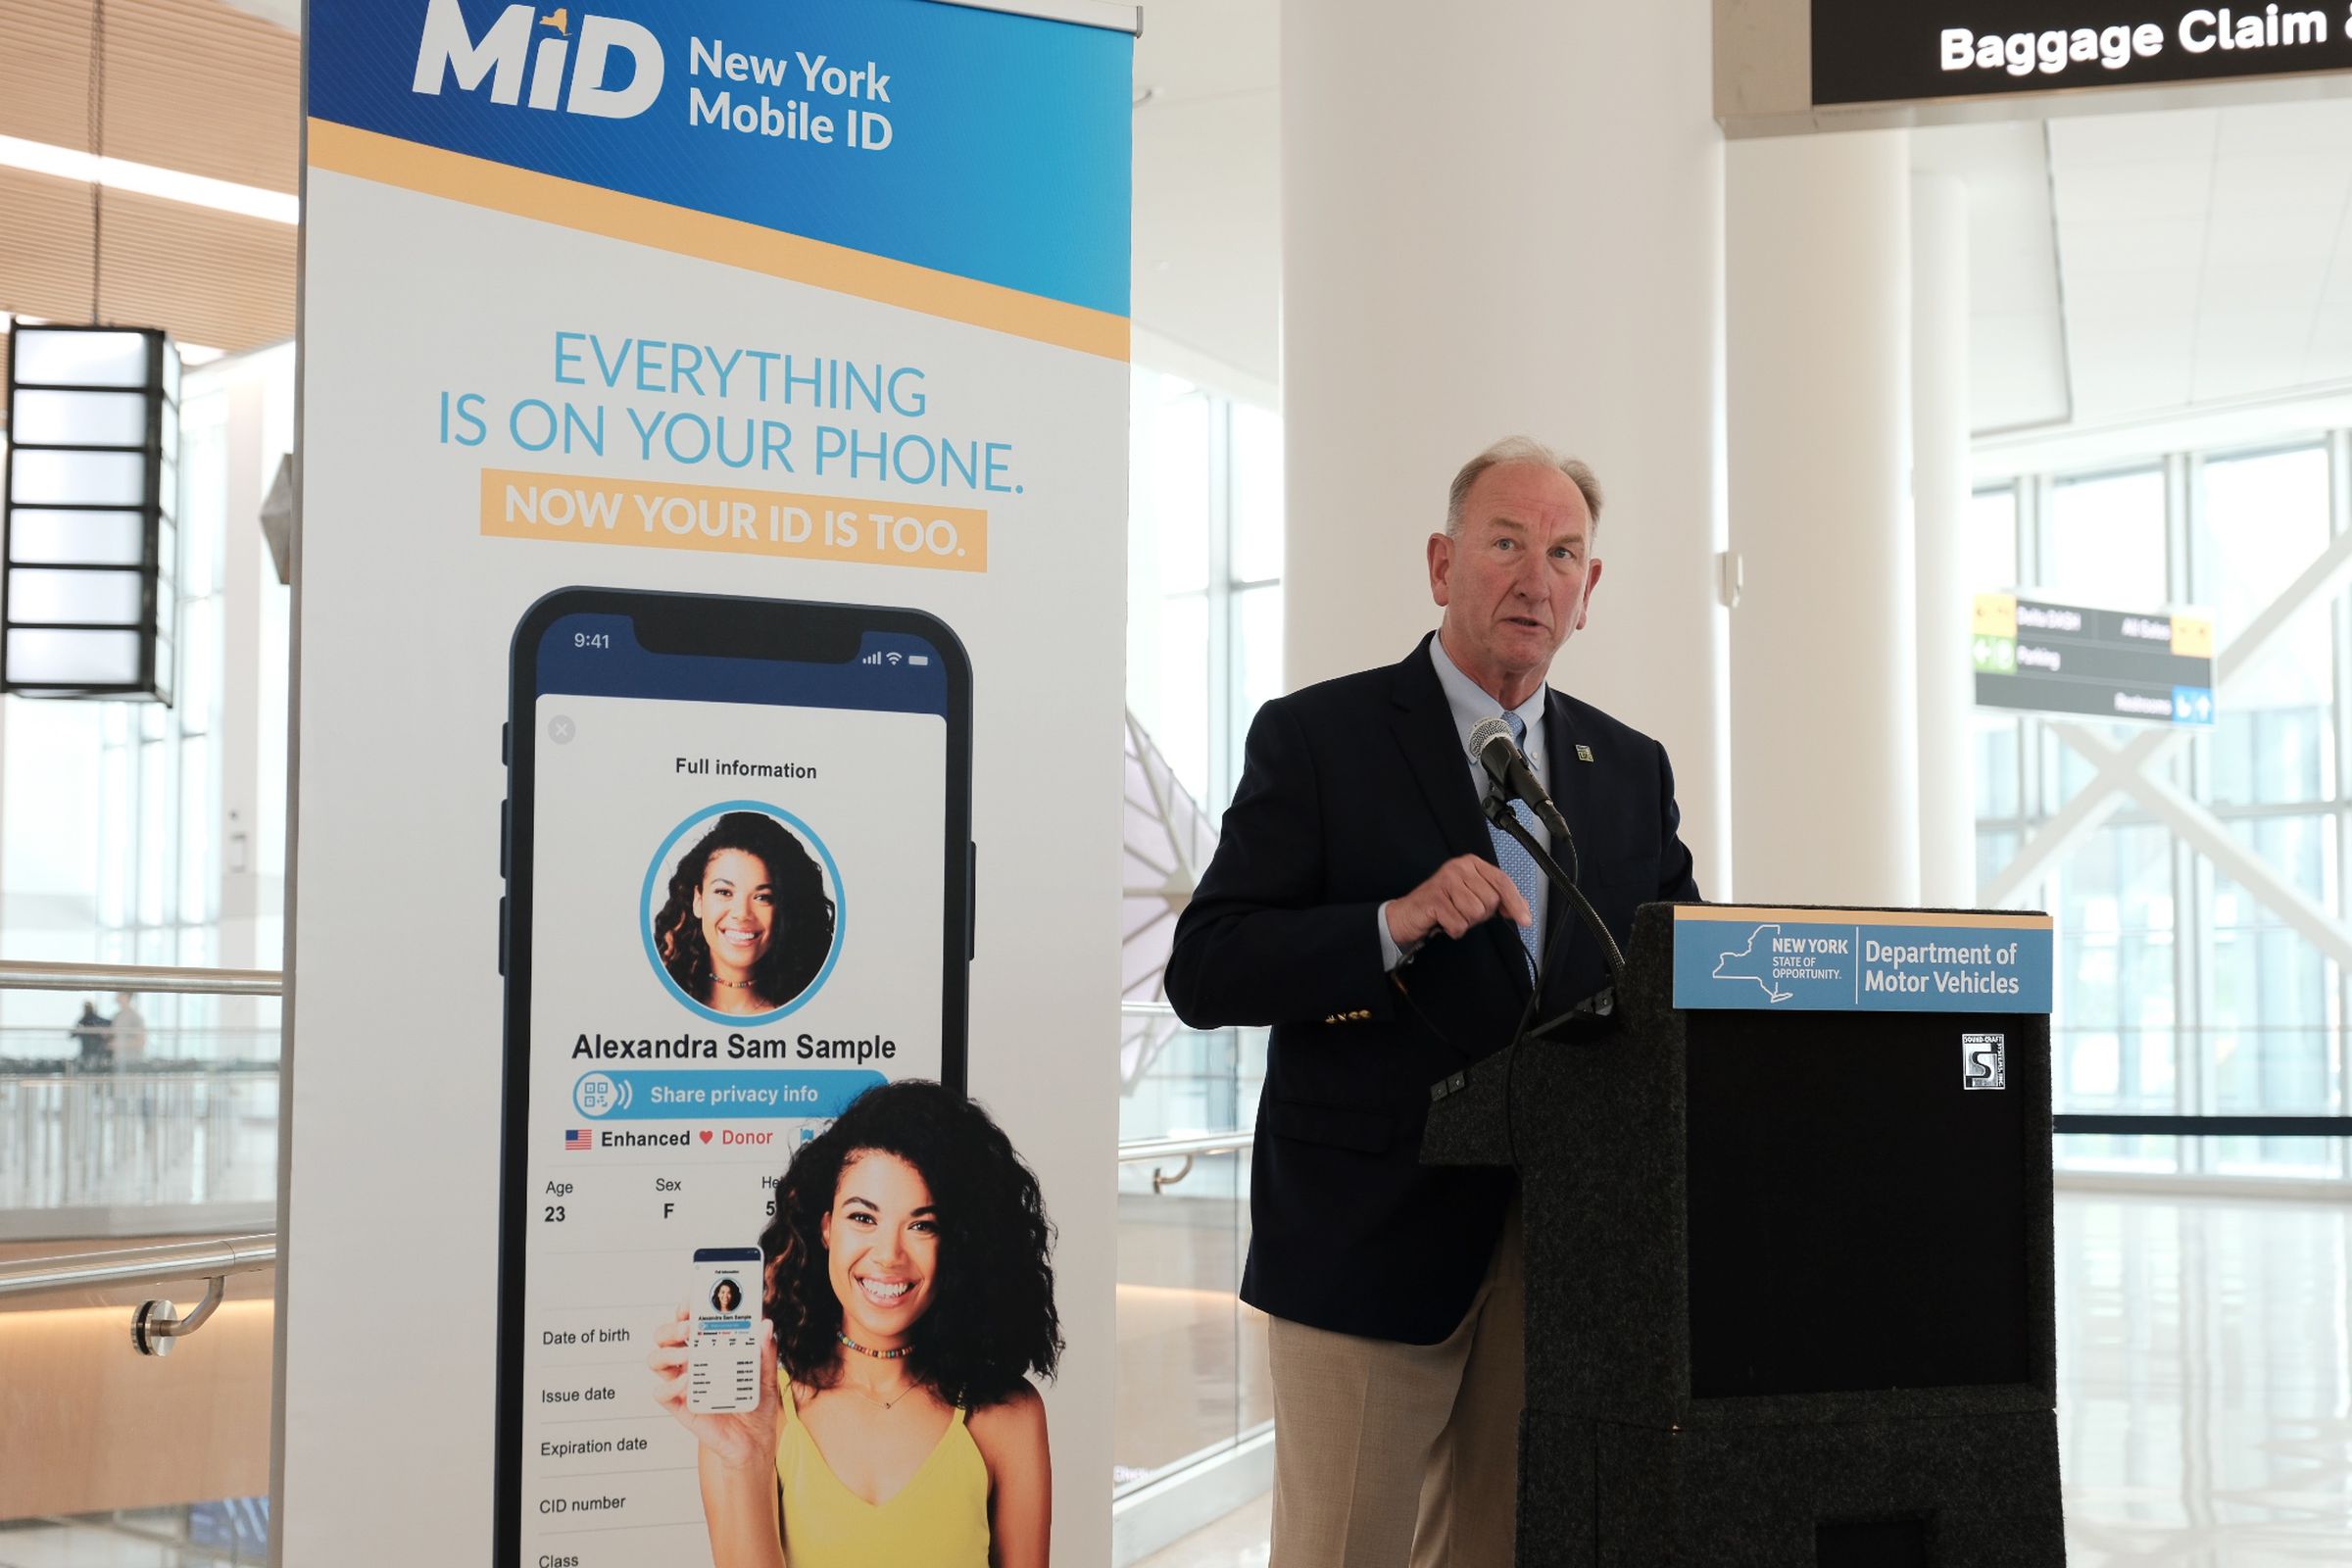 A photo of New York’s Mobile ID program being announced at LaGuardia Airport.